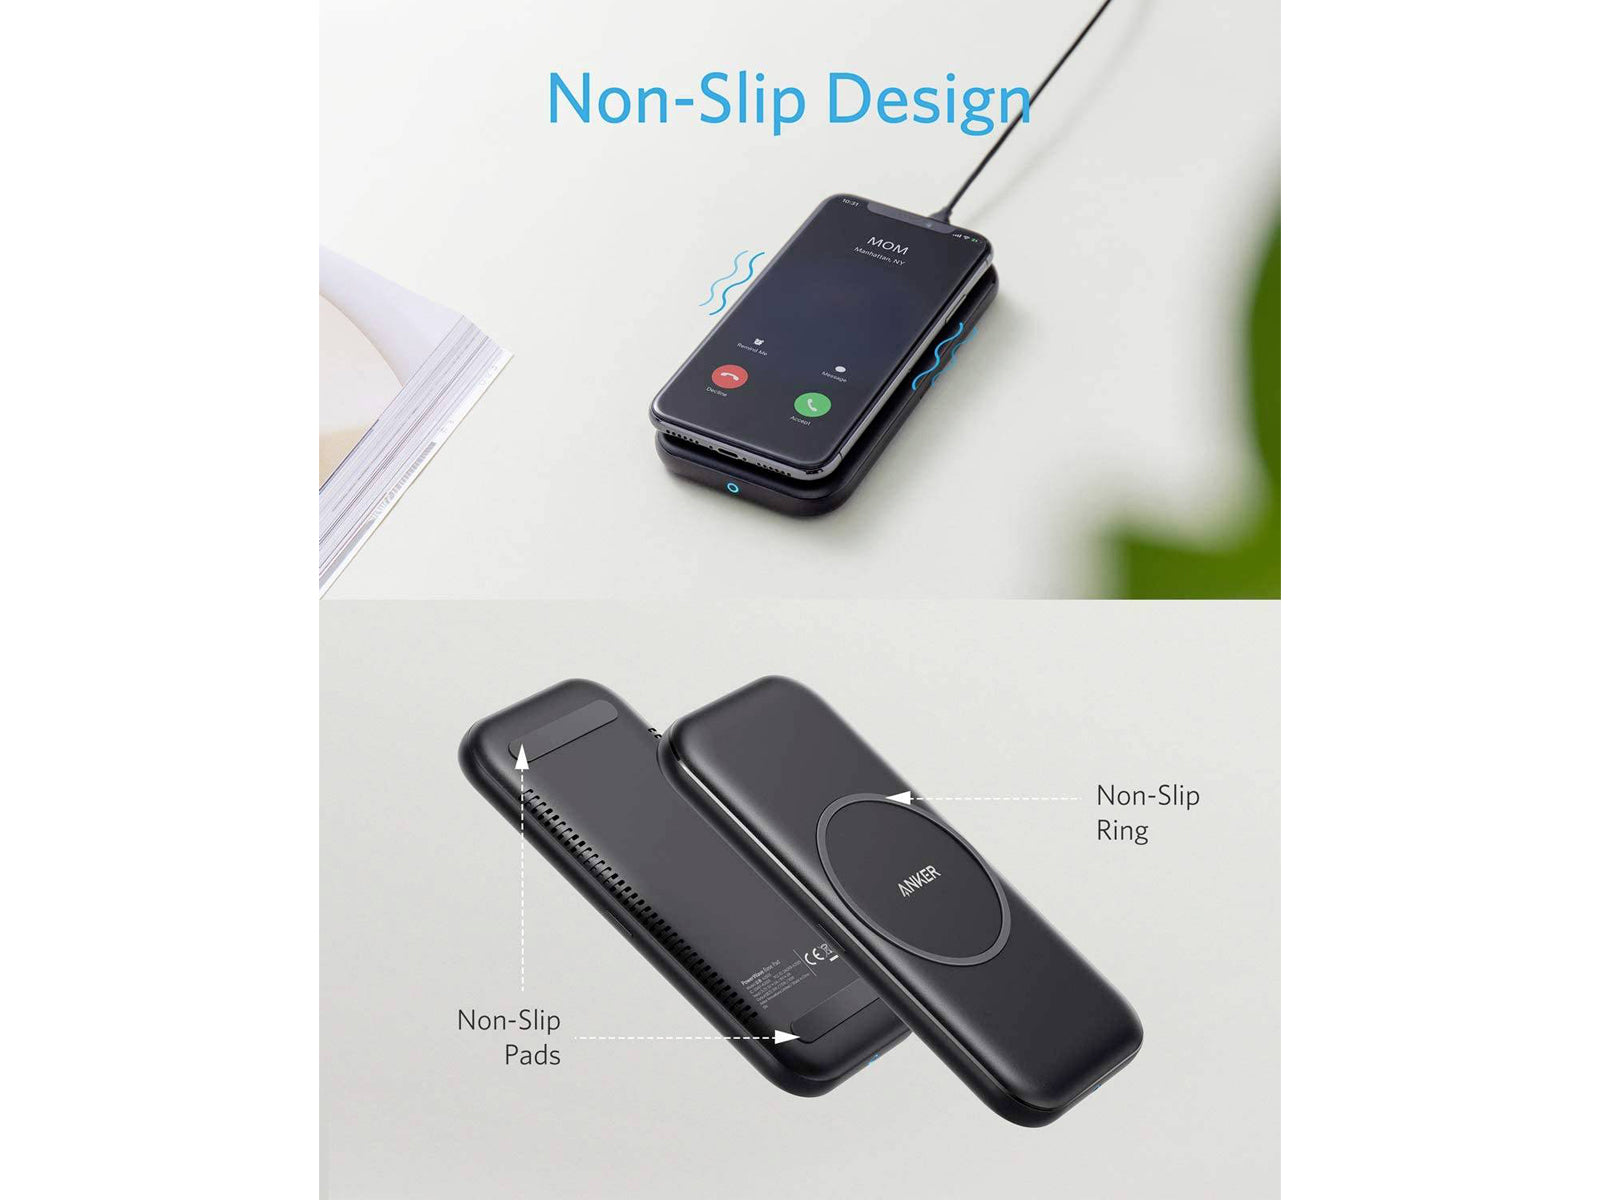 Image shows the non slip feature of the Wireless Charging PowerWave Pad